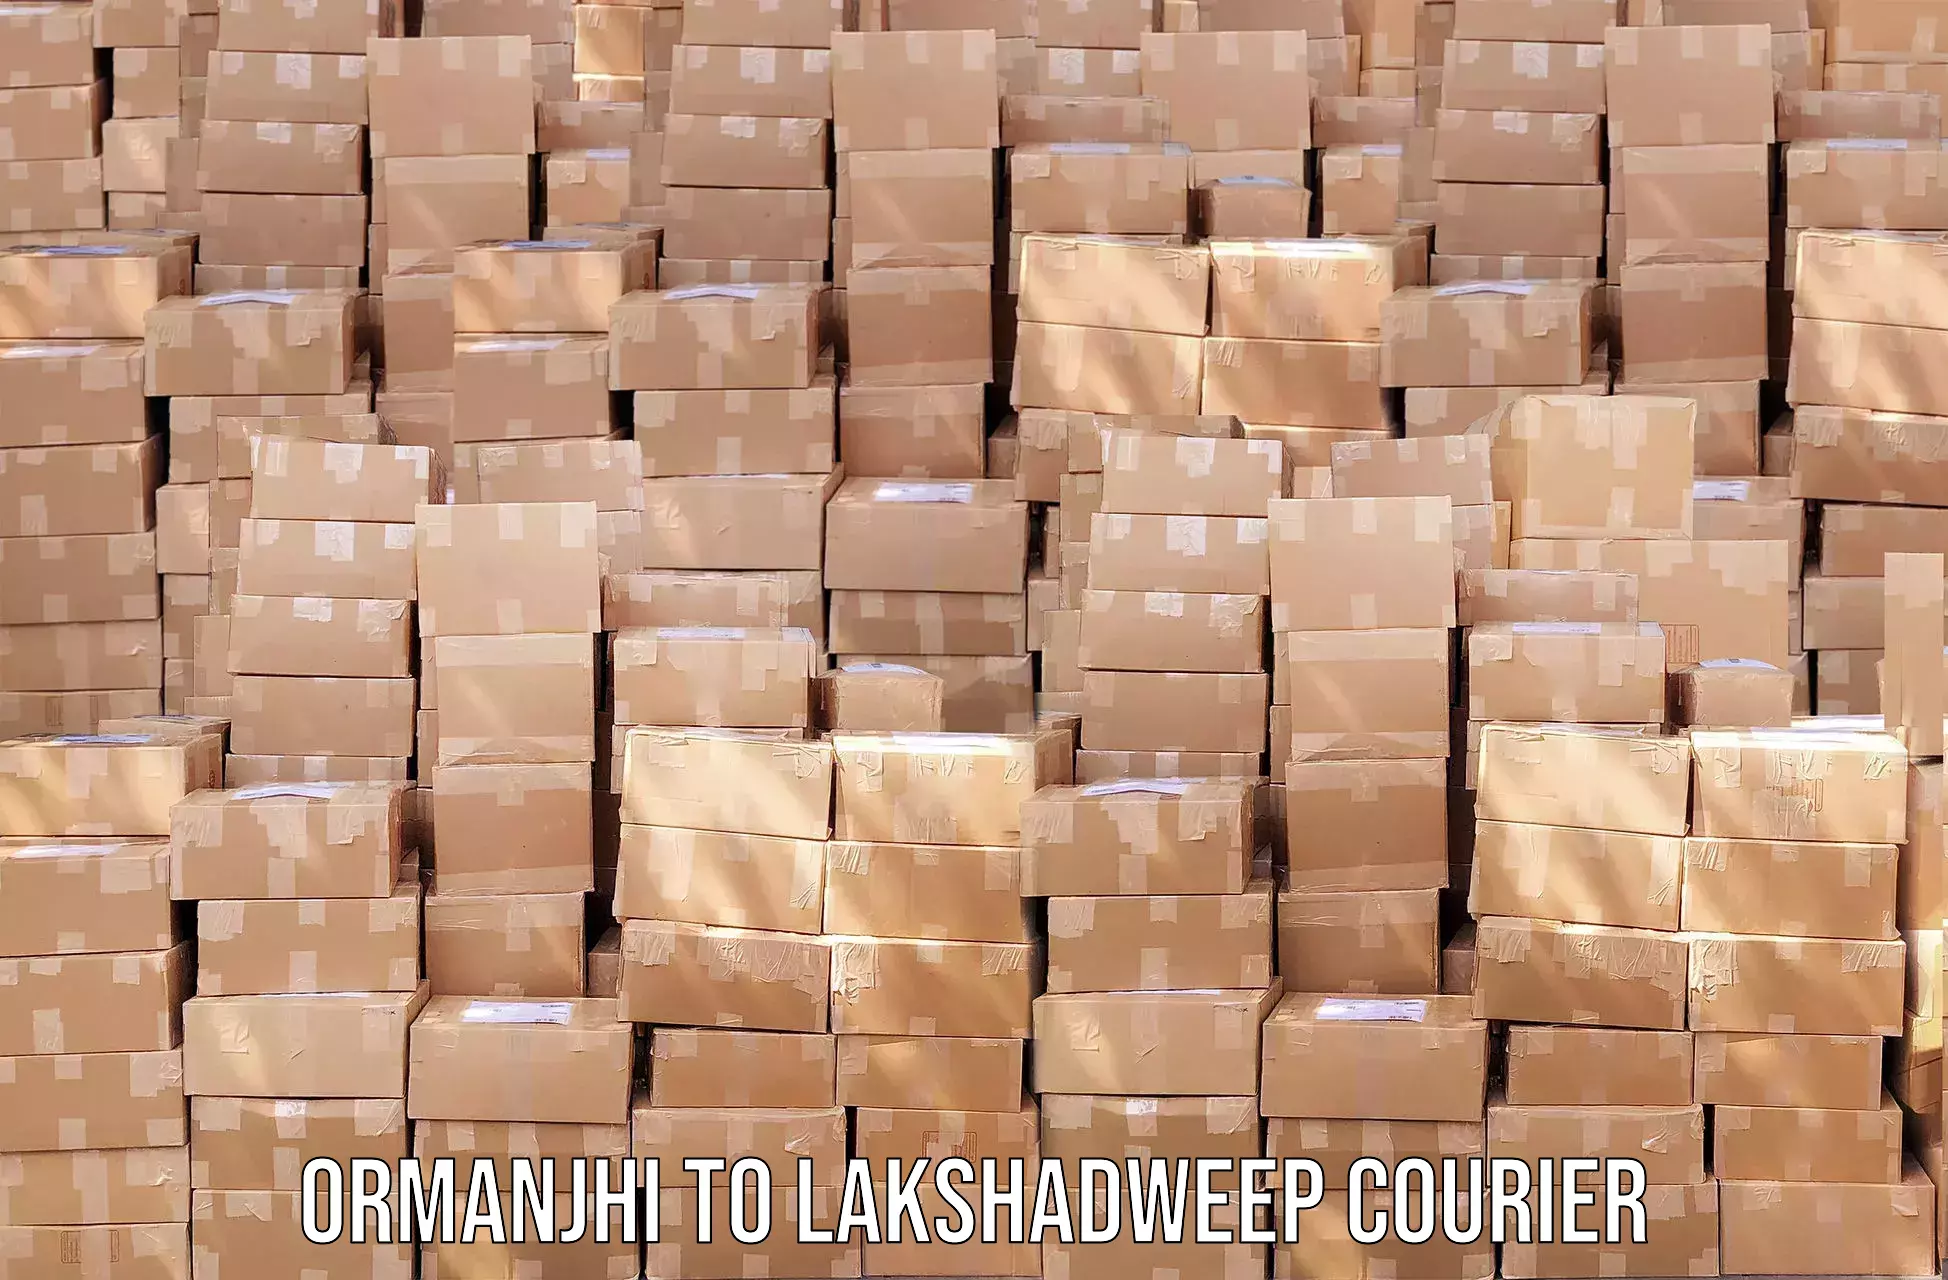 Courier service innovation Ormanjhi to Lakshadweep